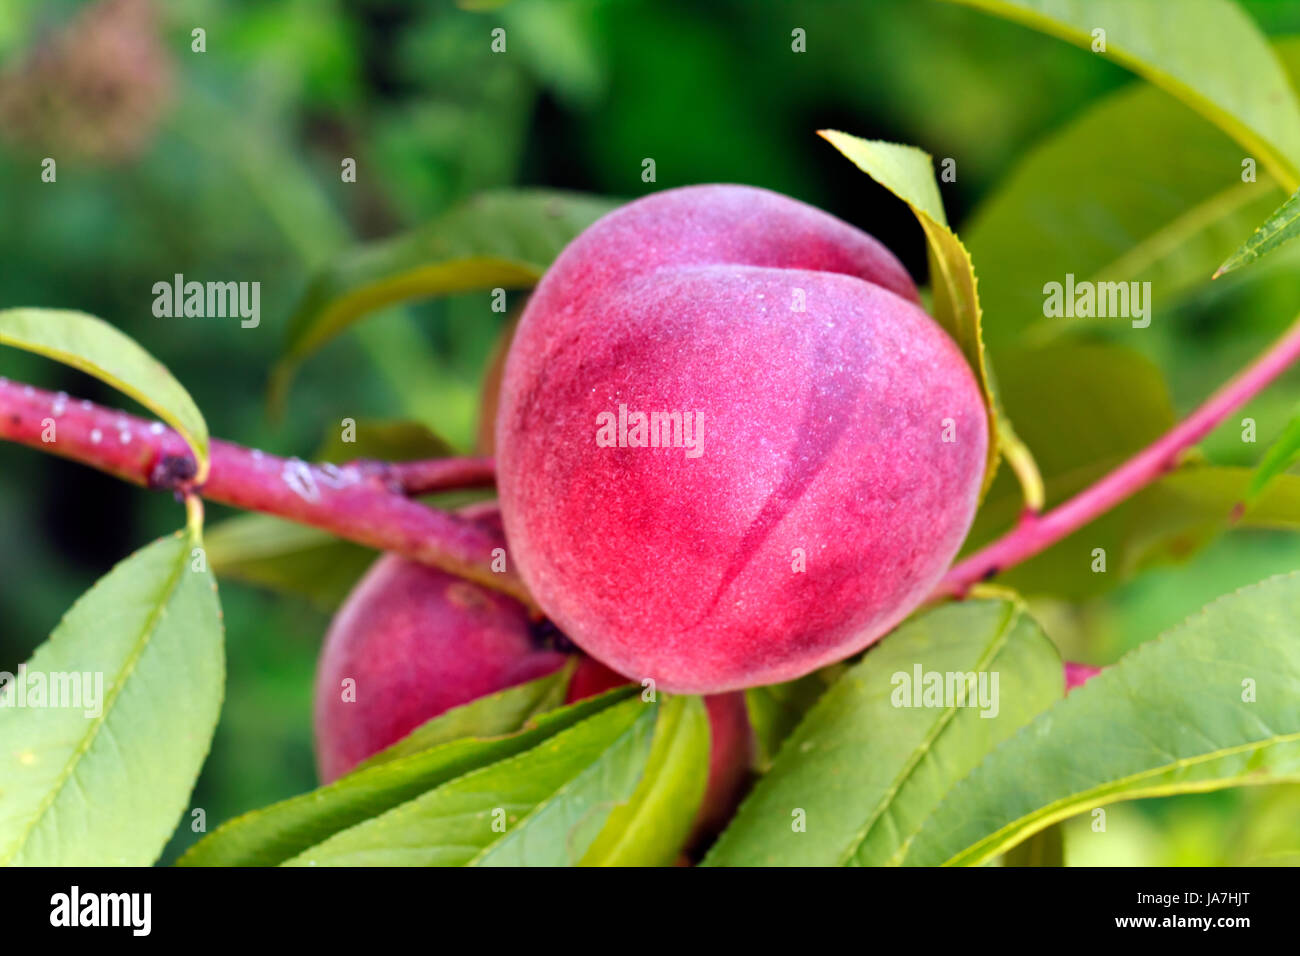 food, aliment, eco, tree, trees, agriculture, farming, progenies, fruits, pome, Stock Photo